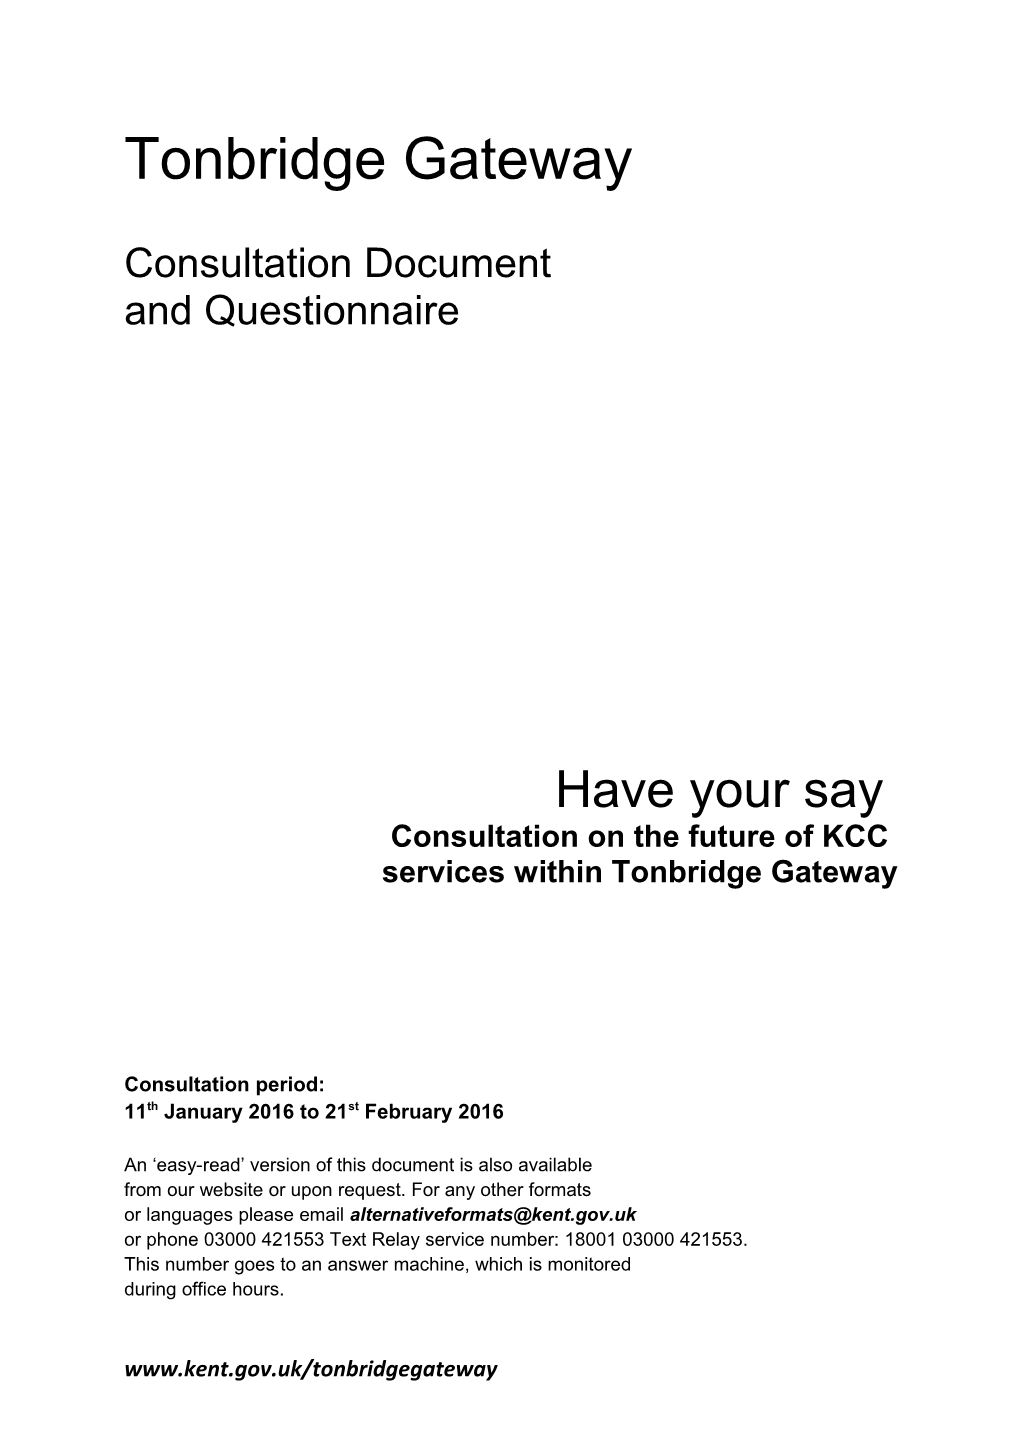 Consultation on the Future of KCC